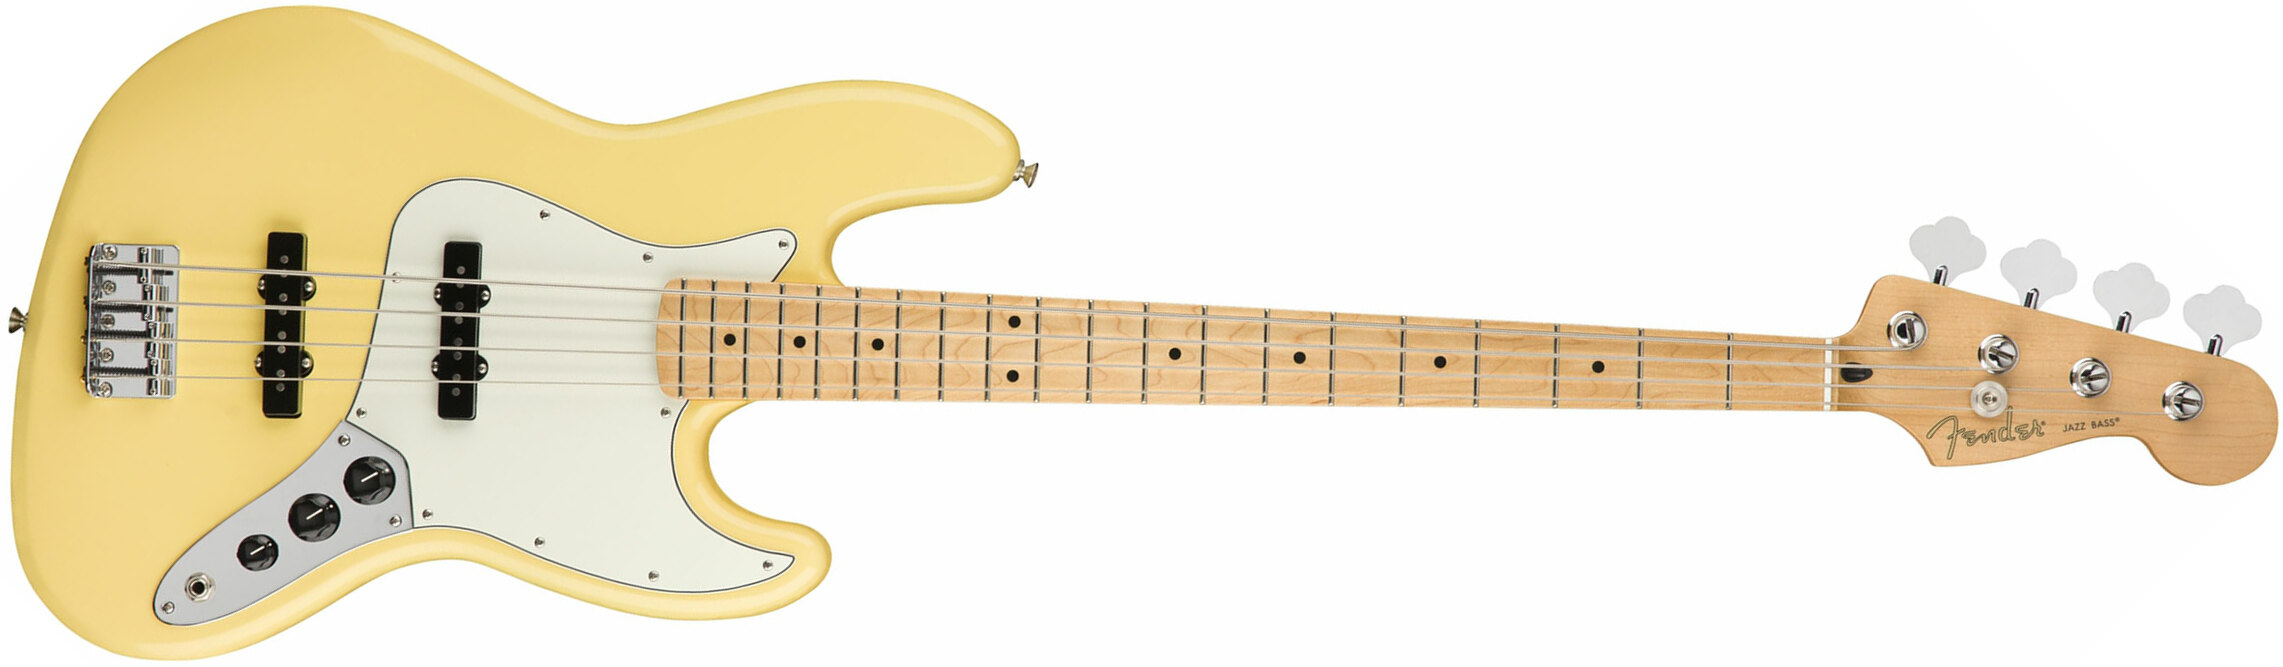 Fender Jazz Bass Player Mex Mn - Buttercream - Solid body electric bass - Main picture